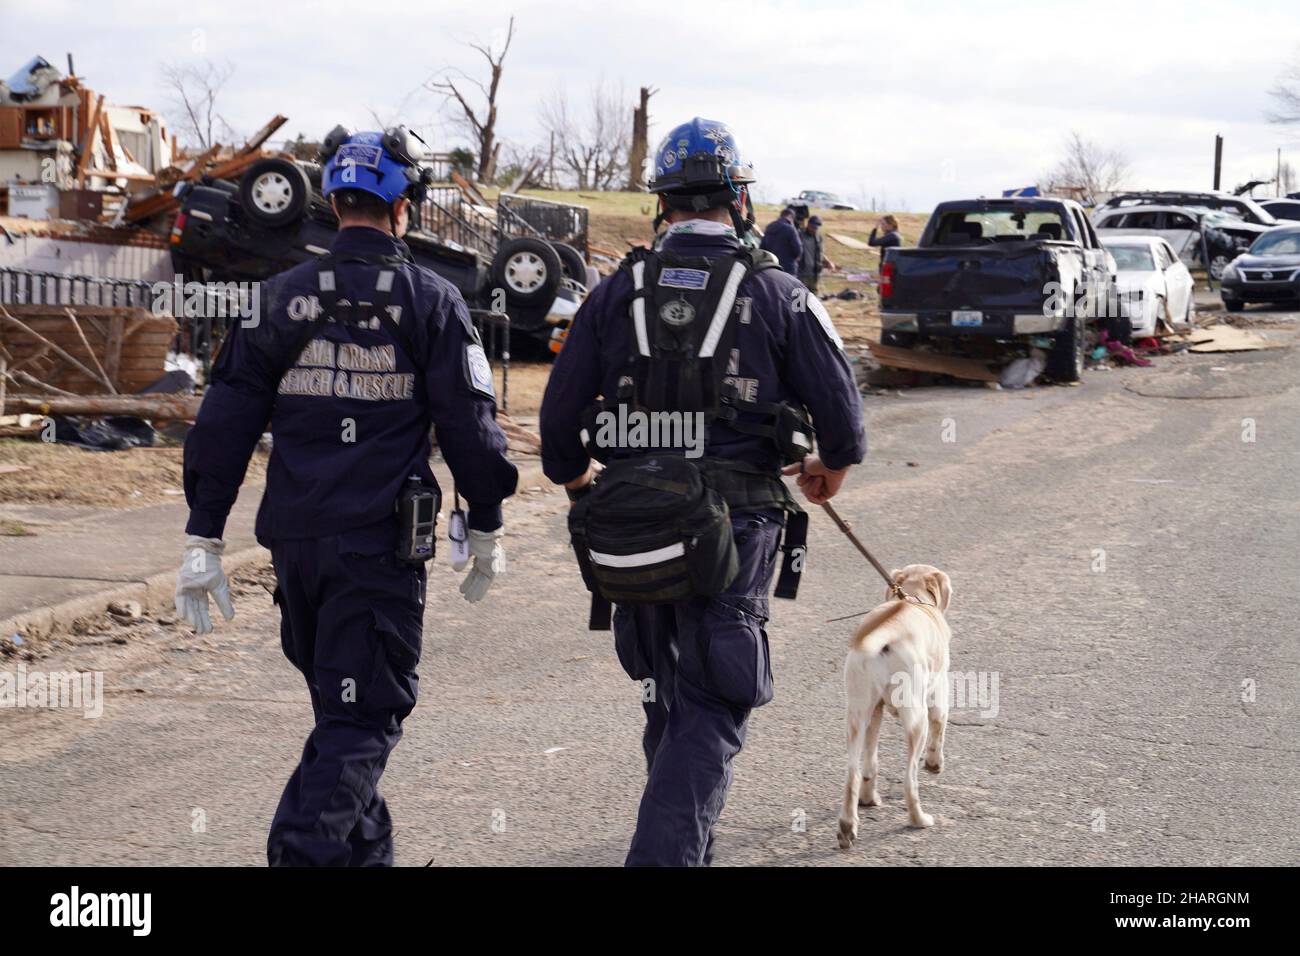 Dawson Springs, United States of America. 14 December, 2021. Urban Search and Rescue teams from Ohio Task Force One working with canine rescue dogs search rubble for survivors in the aftermath of devastating tornadoes that swept across four states destroying structures and killing dozens December 14, 2021 in Dawson Springs, Kentucky. Credit: Dominick Del Vecchio/FEMA/Alamy Live News Stock Photo